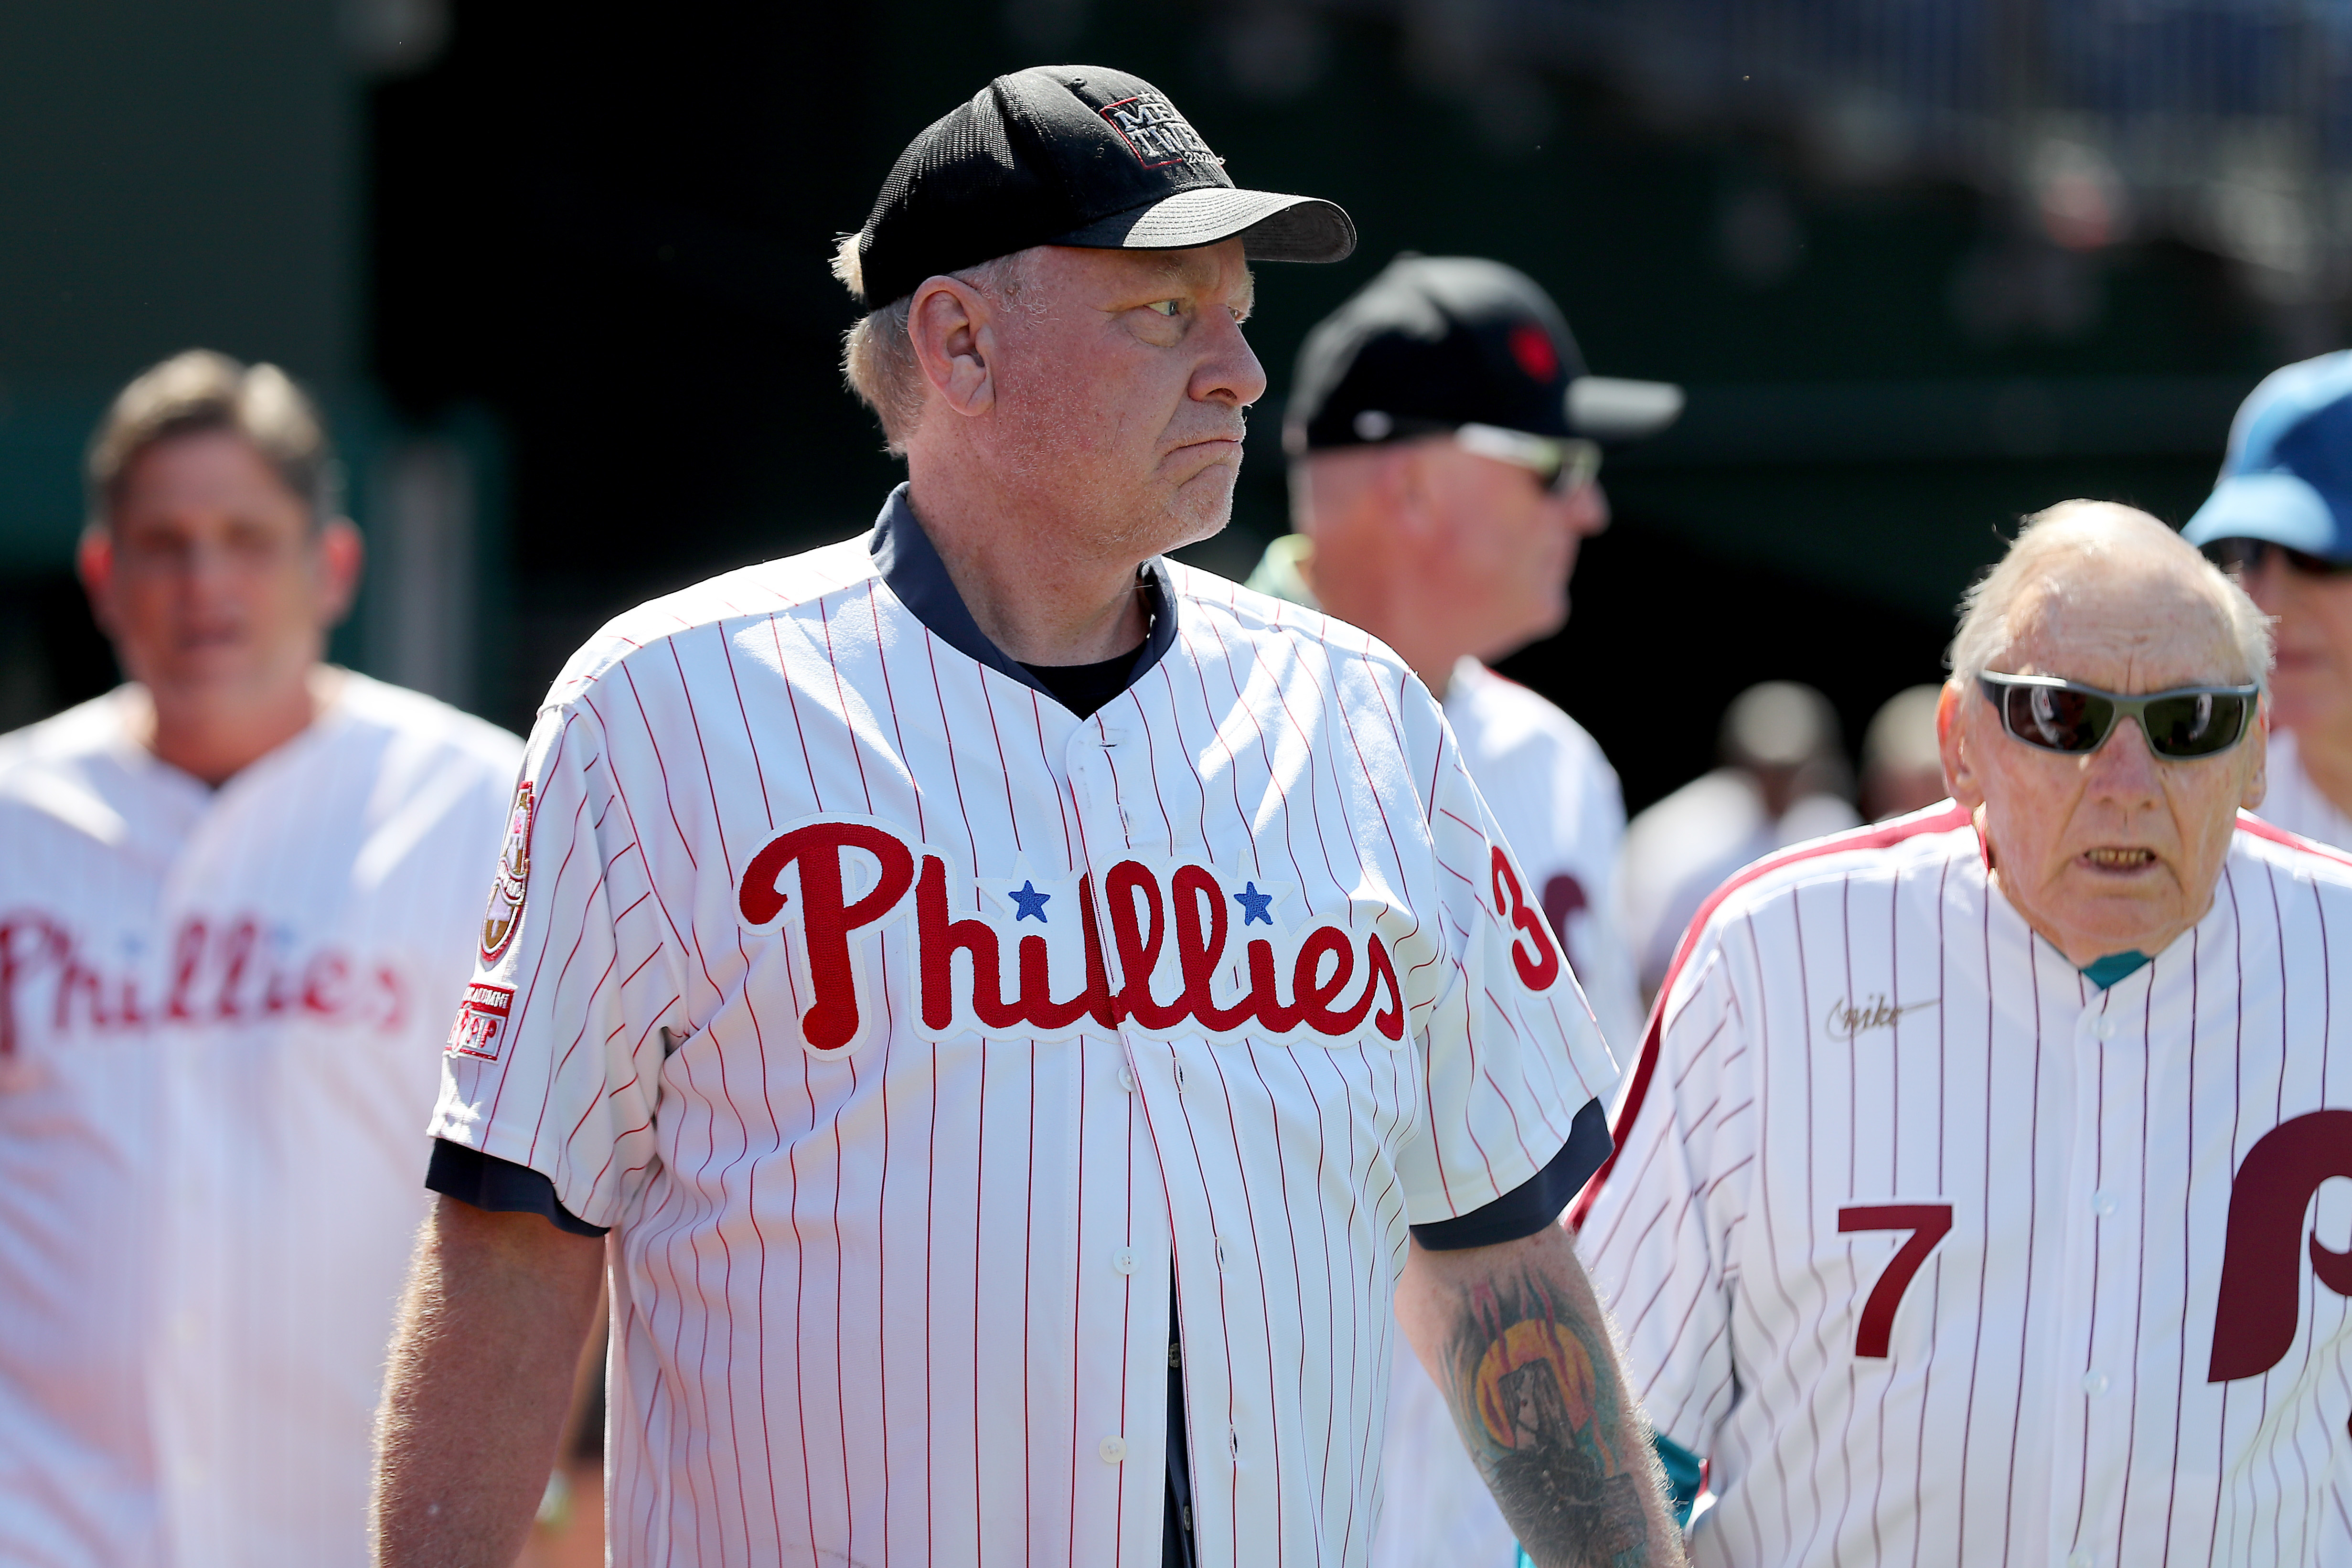 Philadelphia Phillies should remove Curt Schilling's Wall of Fame plaque,  cut ties with him